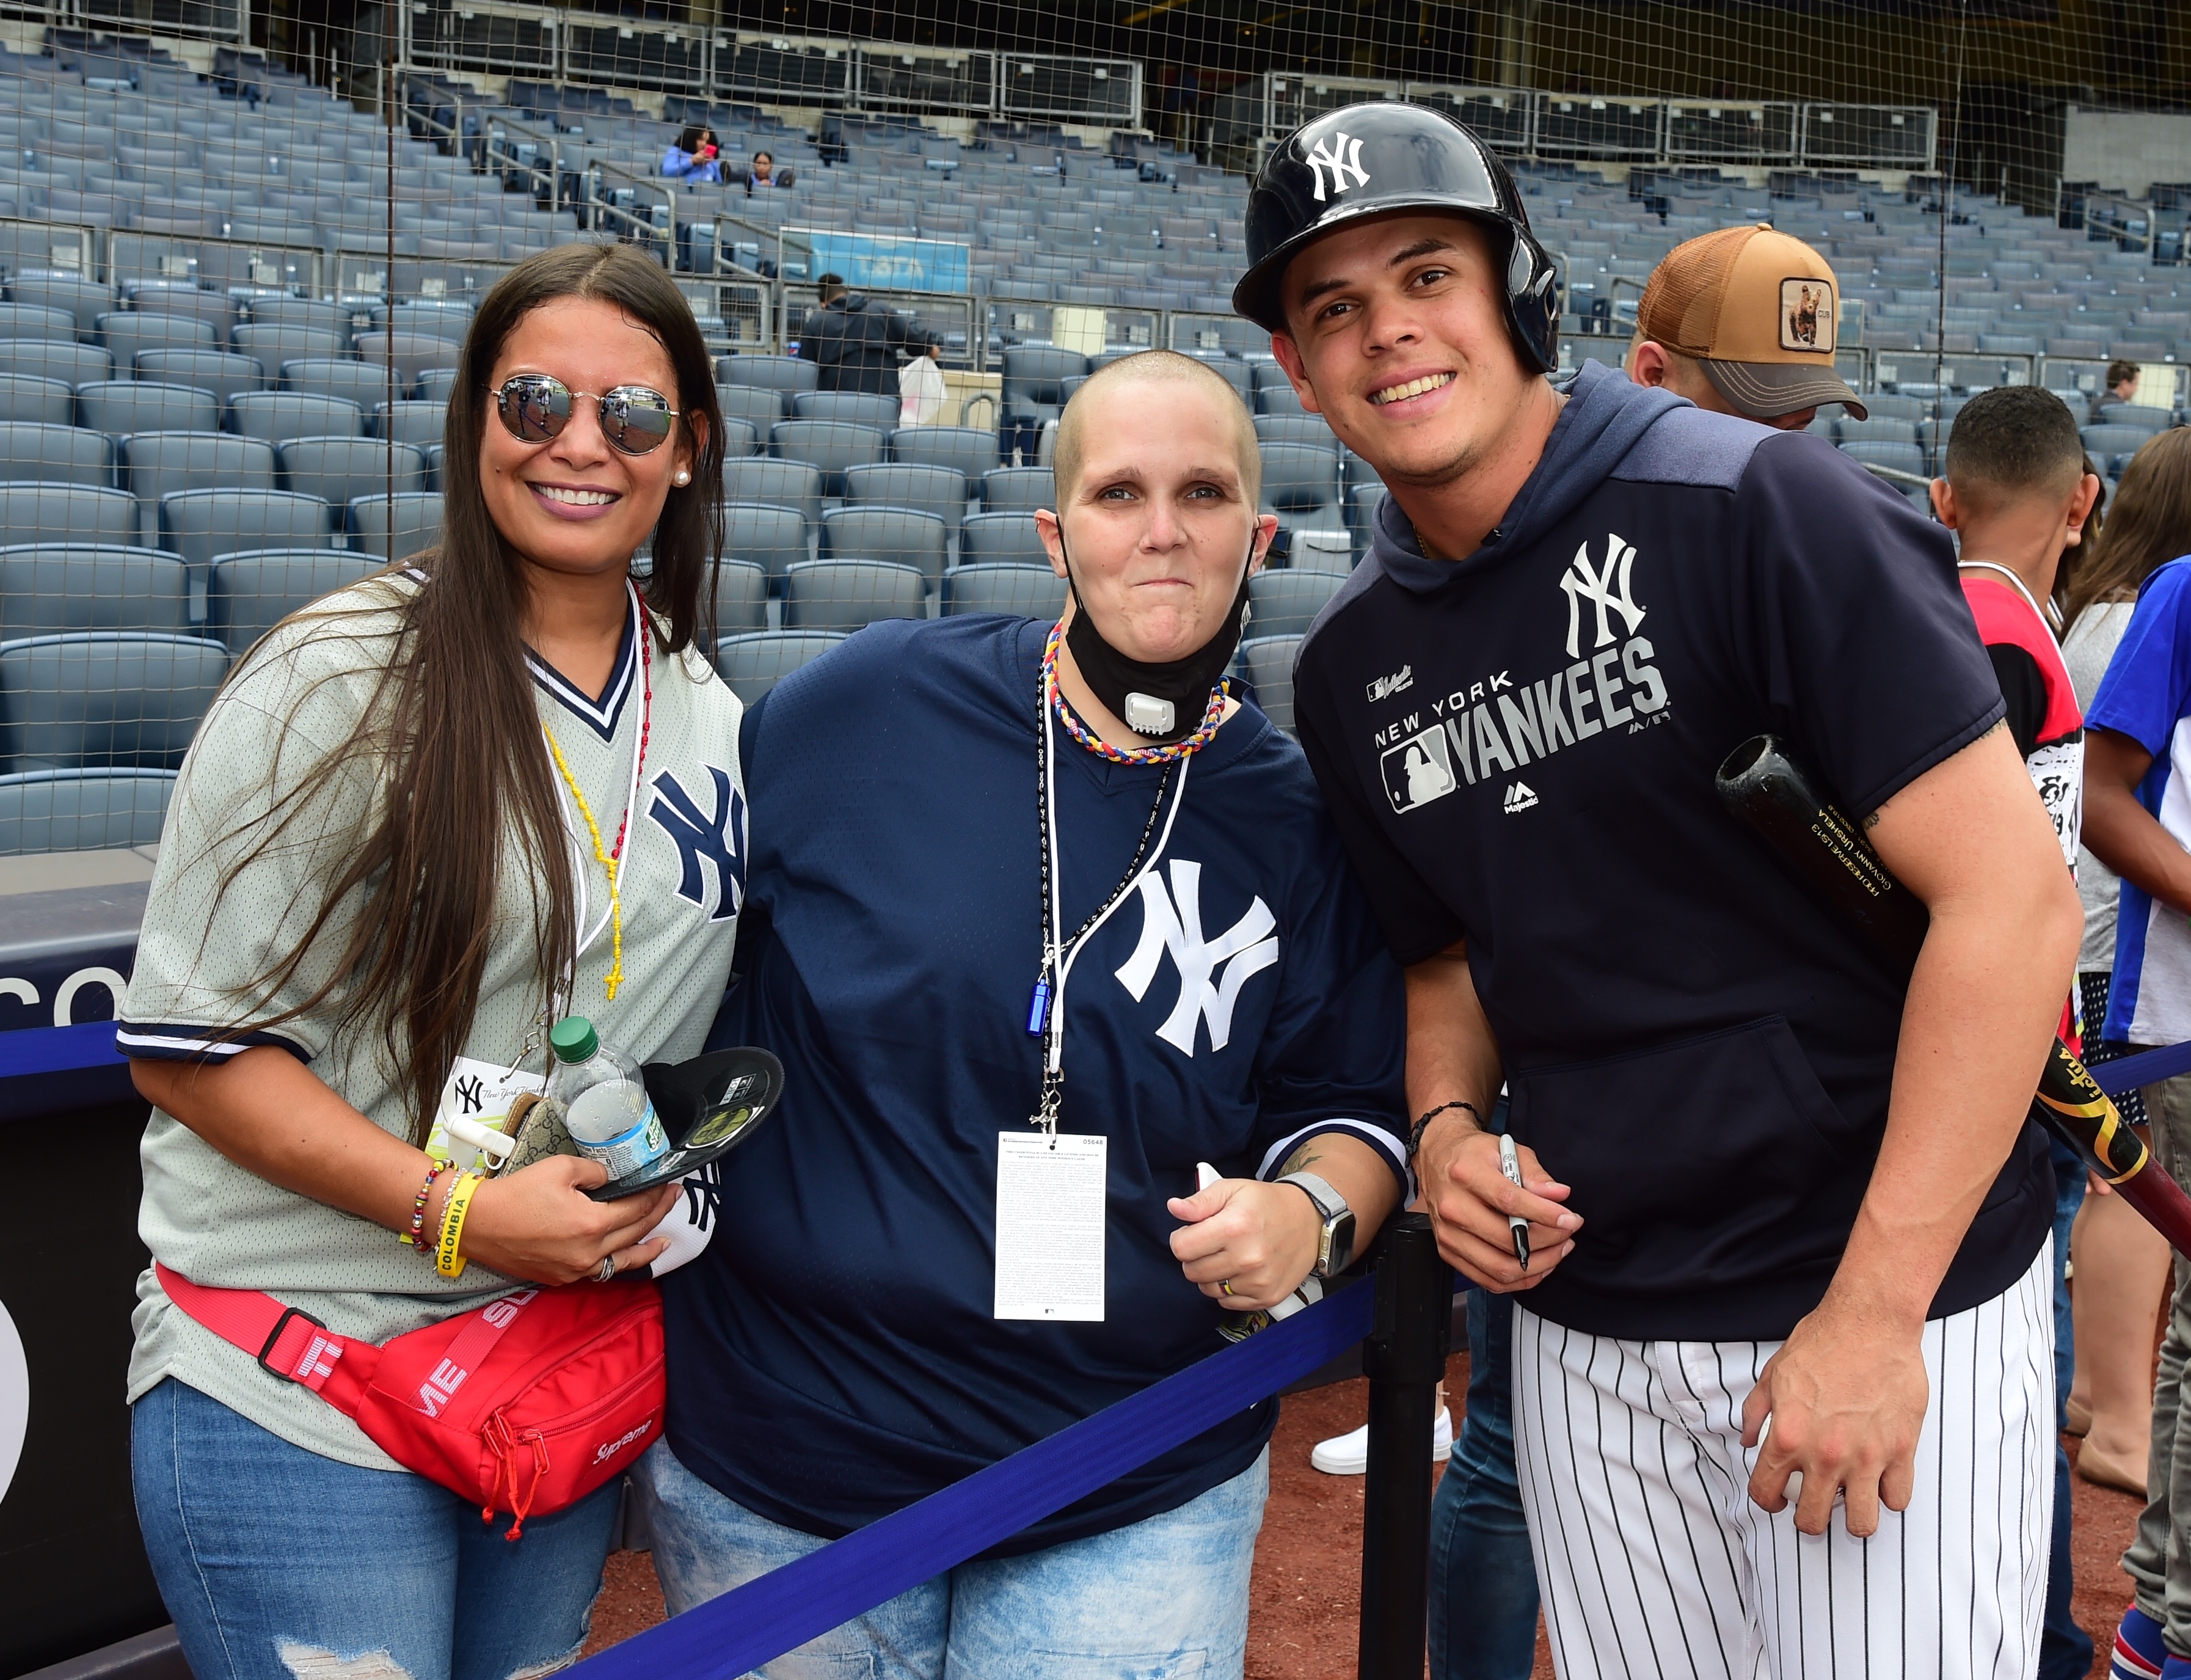 How life has changed for Yankees' Gio Urshela, Colombia's new cult hero 